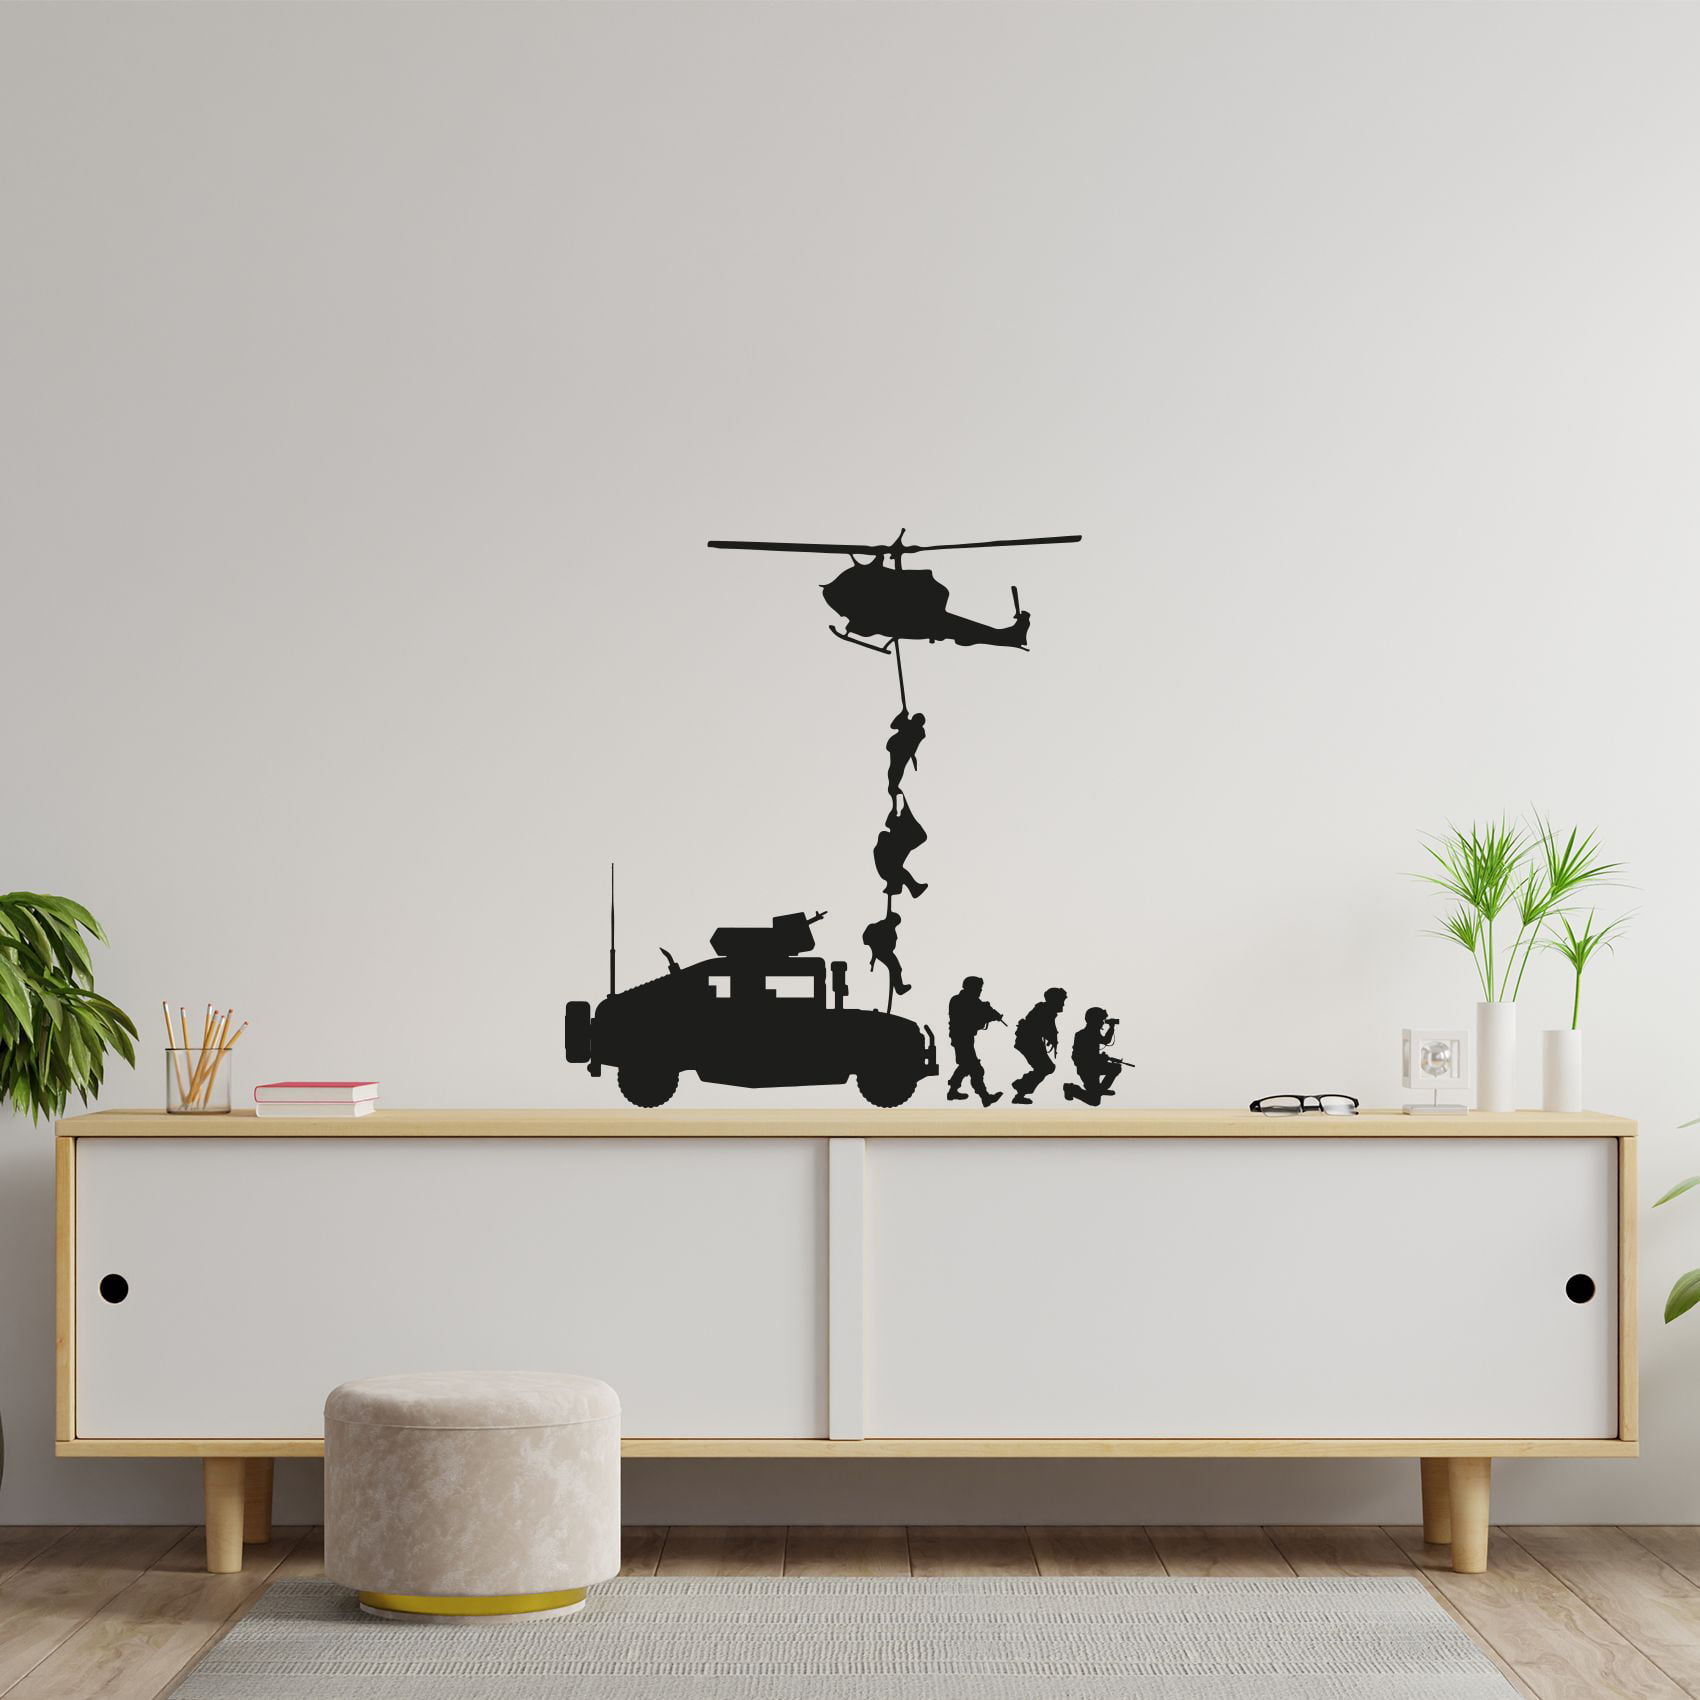 Military Swat Team Army Soldier Truck Vehicle Shadow Wall Sticker Art Decal for Girls Boys Room Rooms Home Decor Stickers Walls Art Vinyl